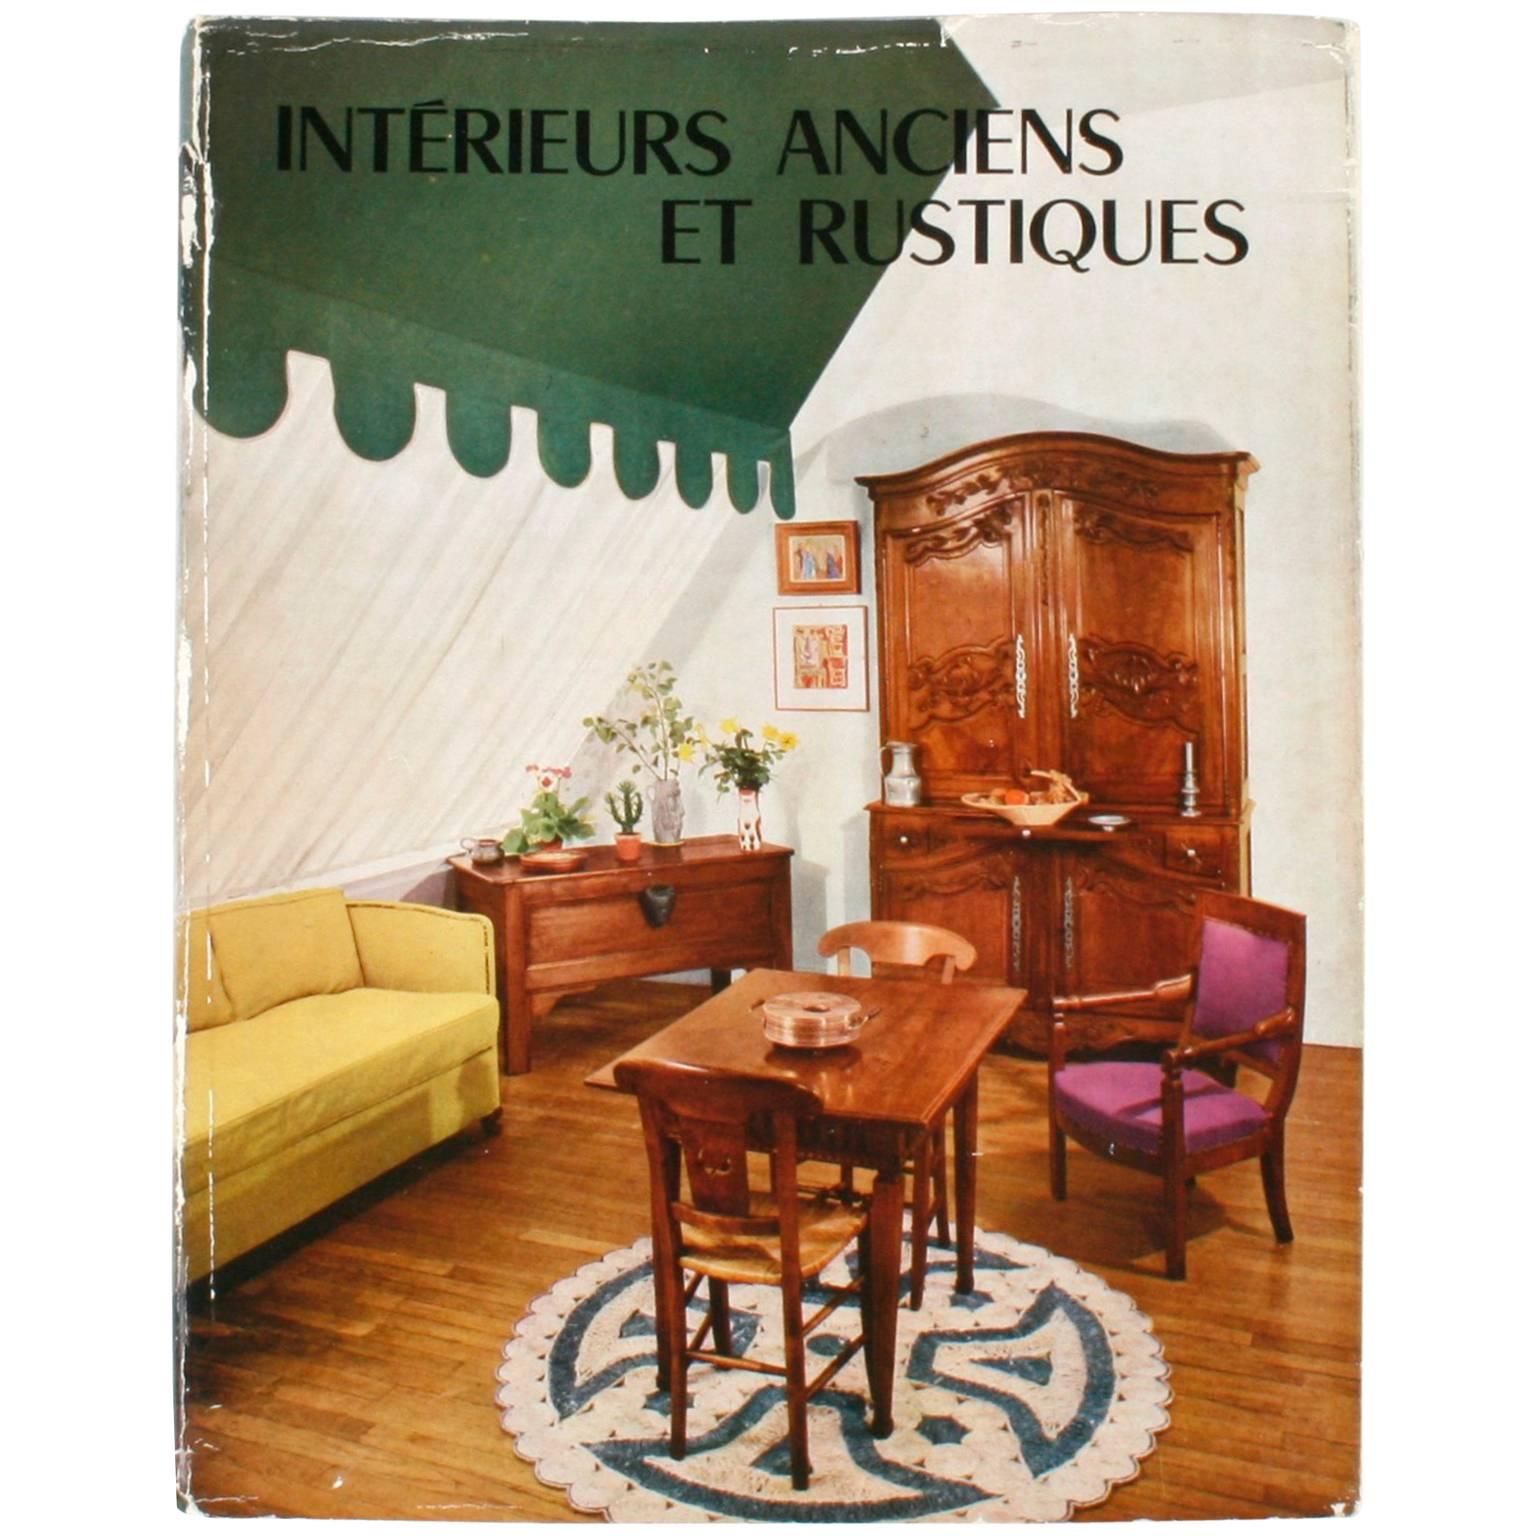 Intérieurs Anciens et Rustique (Old and Rustic Interiors) by Maurice Andrac